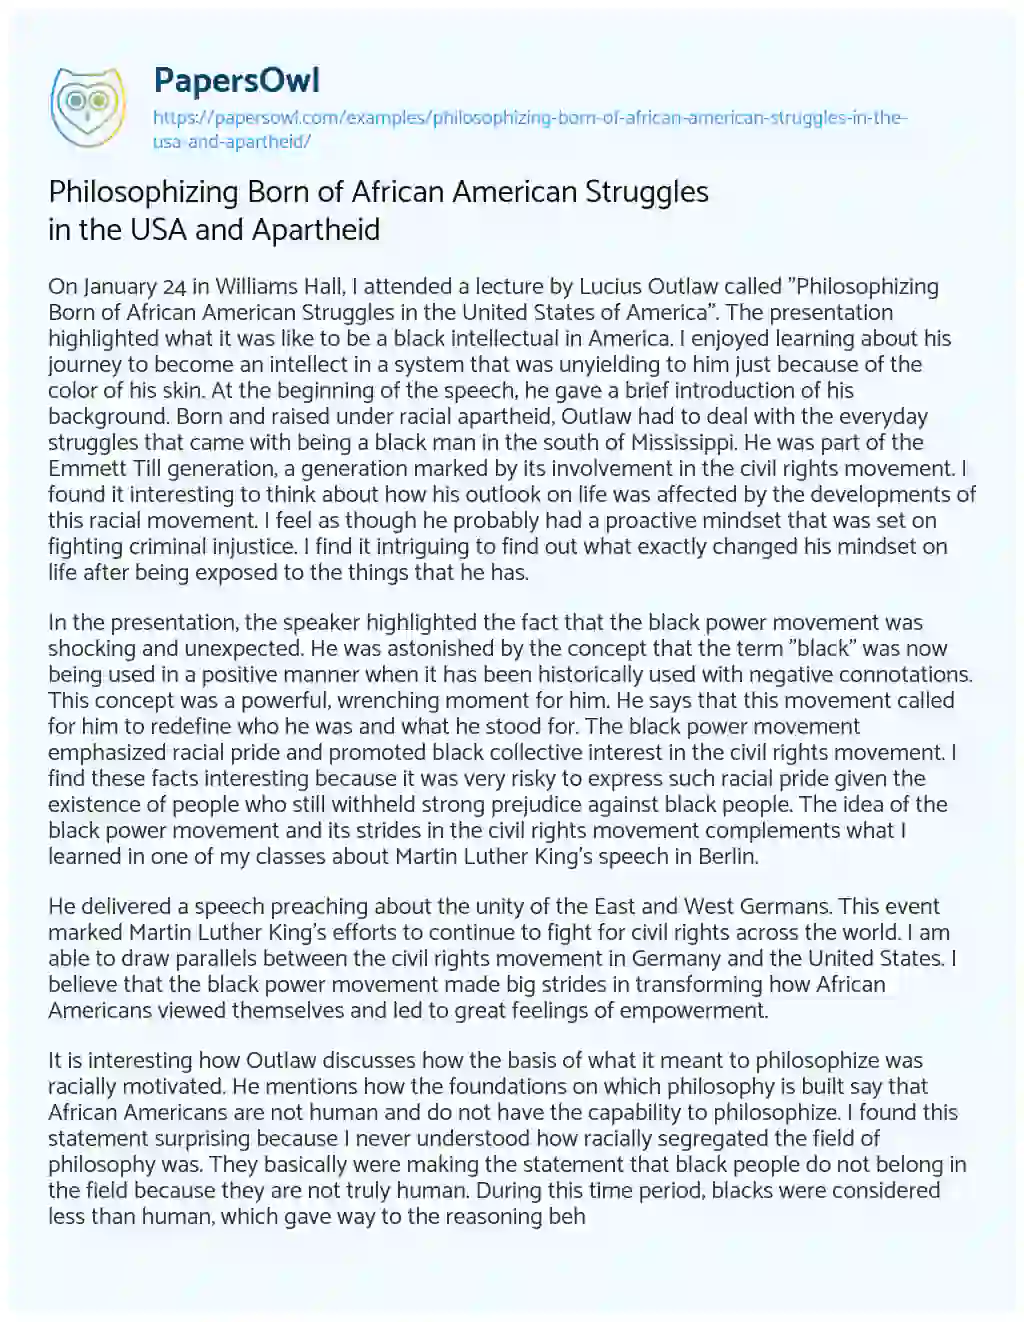 Essay on Philosophizing Born of African American Struggles in the USA and Apartheid